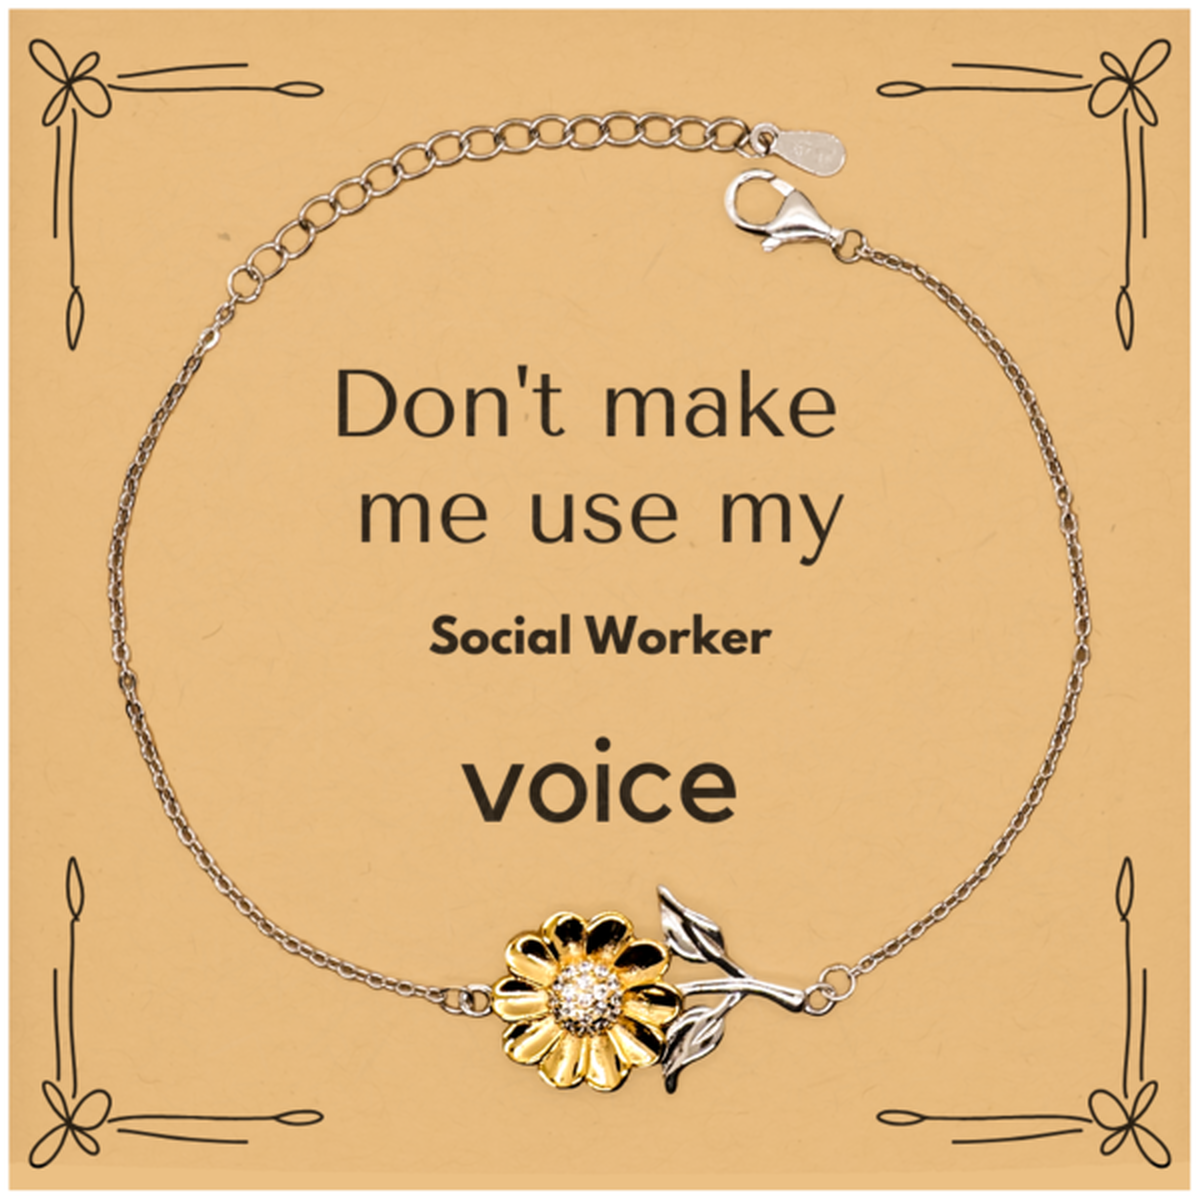 Don't make me use my Social Worker voice, Sarcasm Social Worker Card Gifts, Christmas Social Worker Sunflower Bracelet Birthday Unique Gifts For Social Worker Coworkers, Men, Women, Colleague, Friends